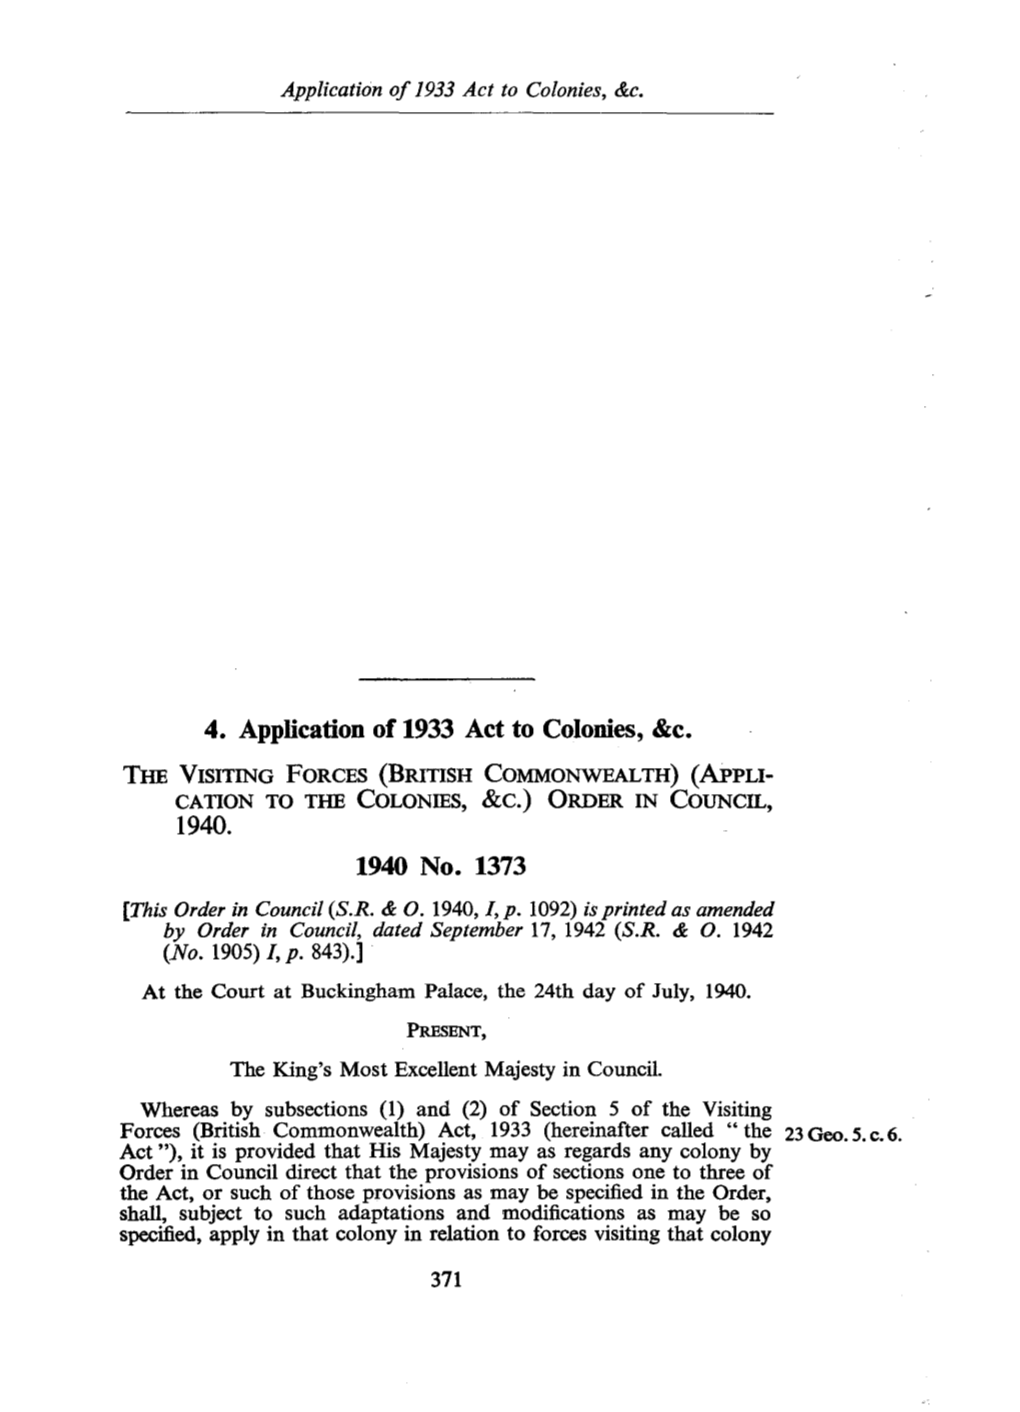 4. Application of 1933 Act to Colonies, &C. 1940 No. 1373